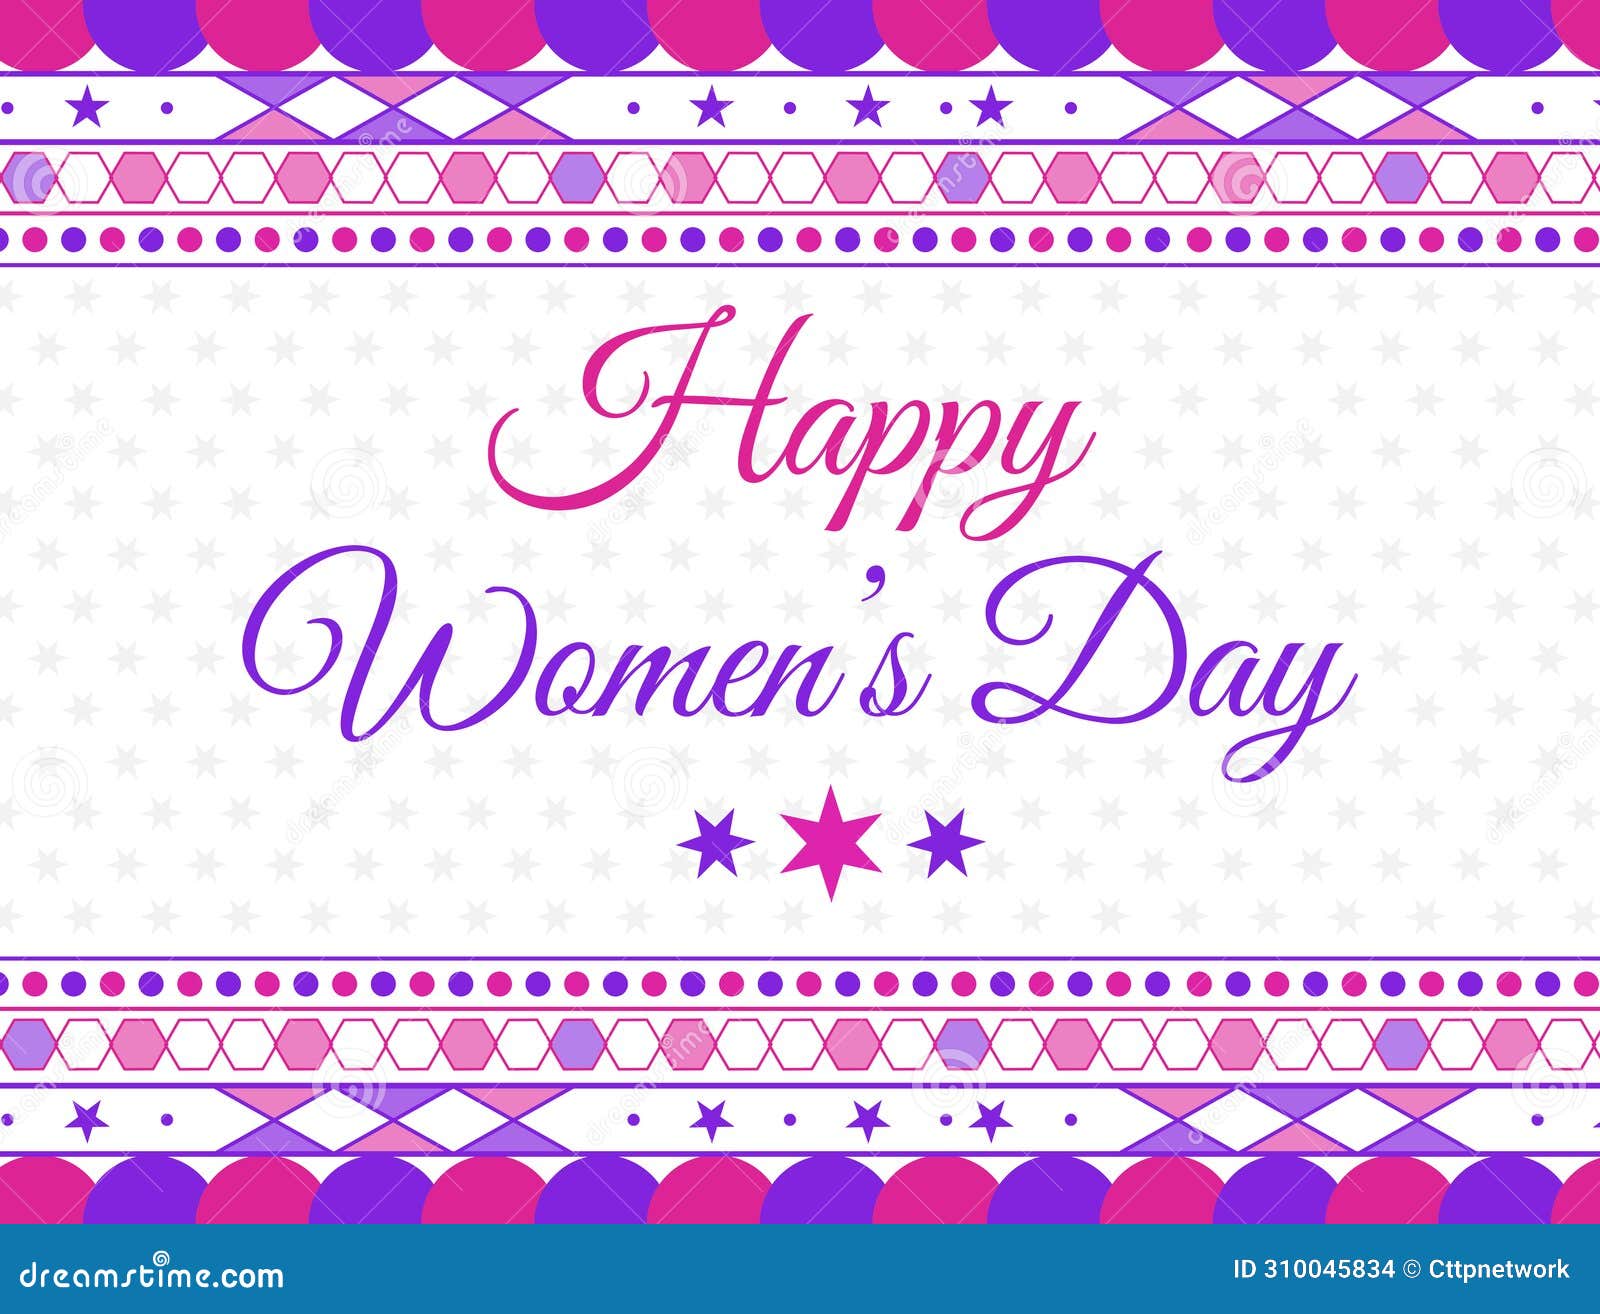 happy womens day wallpaper with colorful traditional border  and typography in the center. march 8 is celebrated as womens